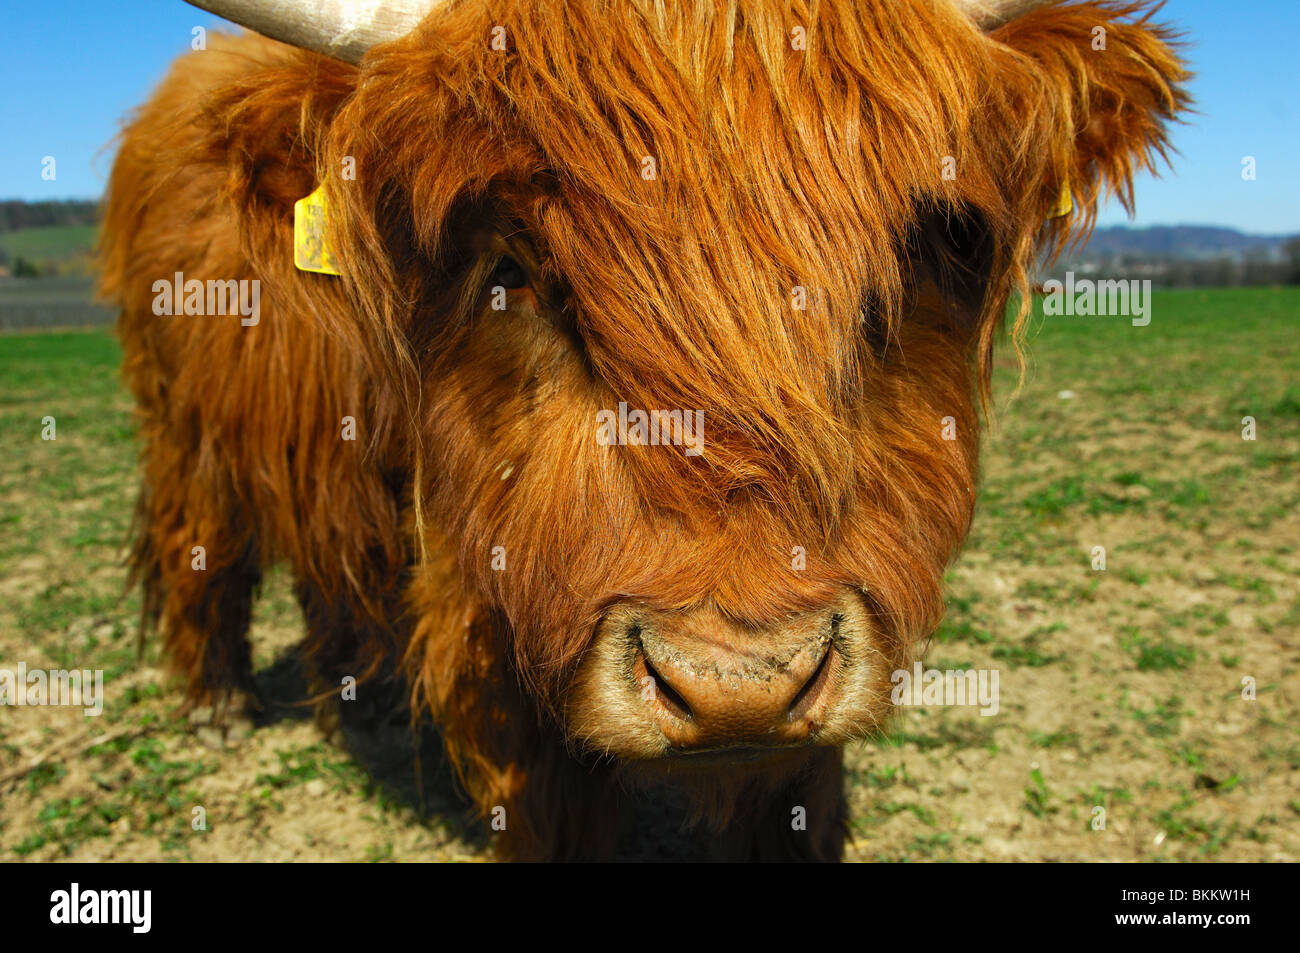 Youngster, red-brown Highland Cattle, Kyloe Stock Photo